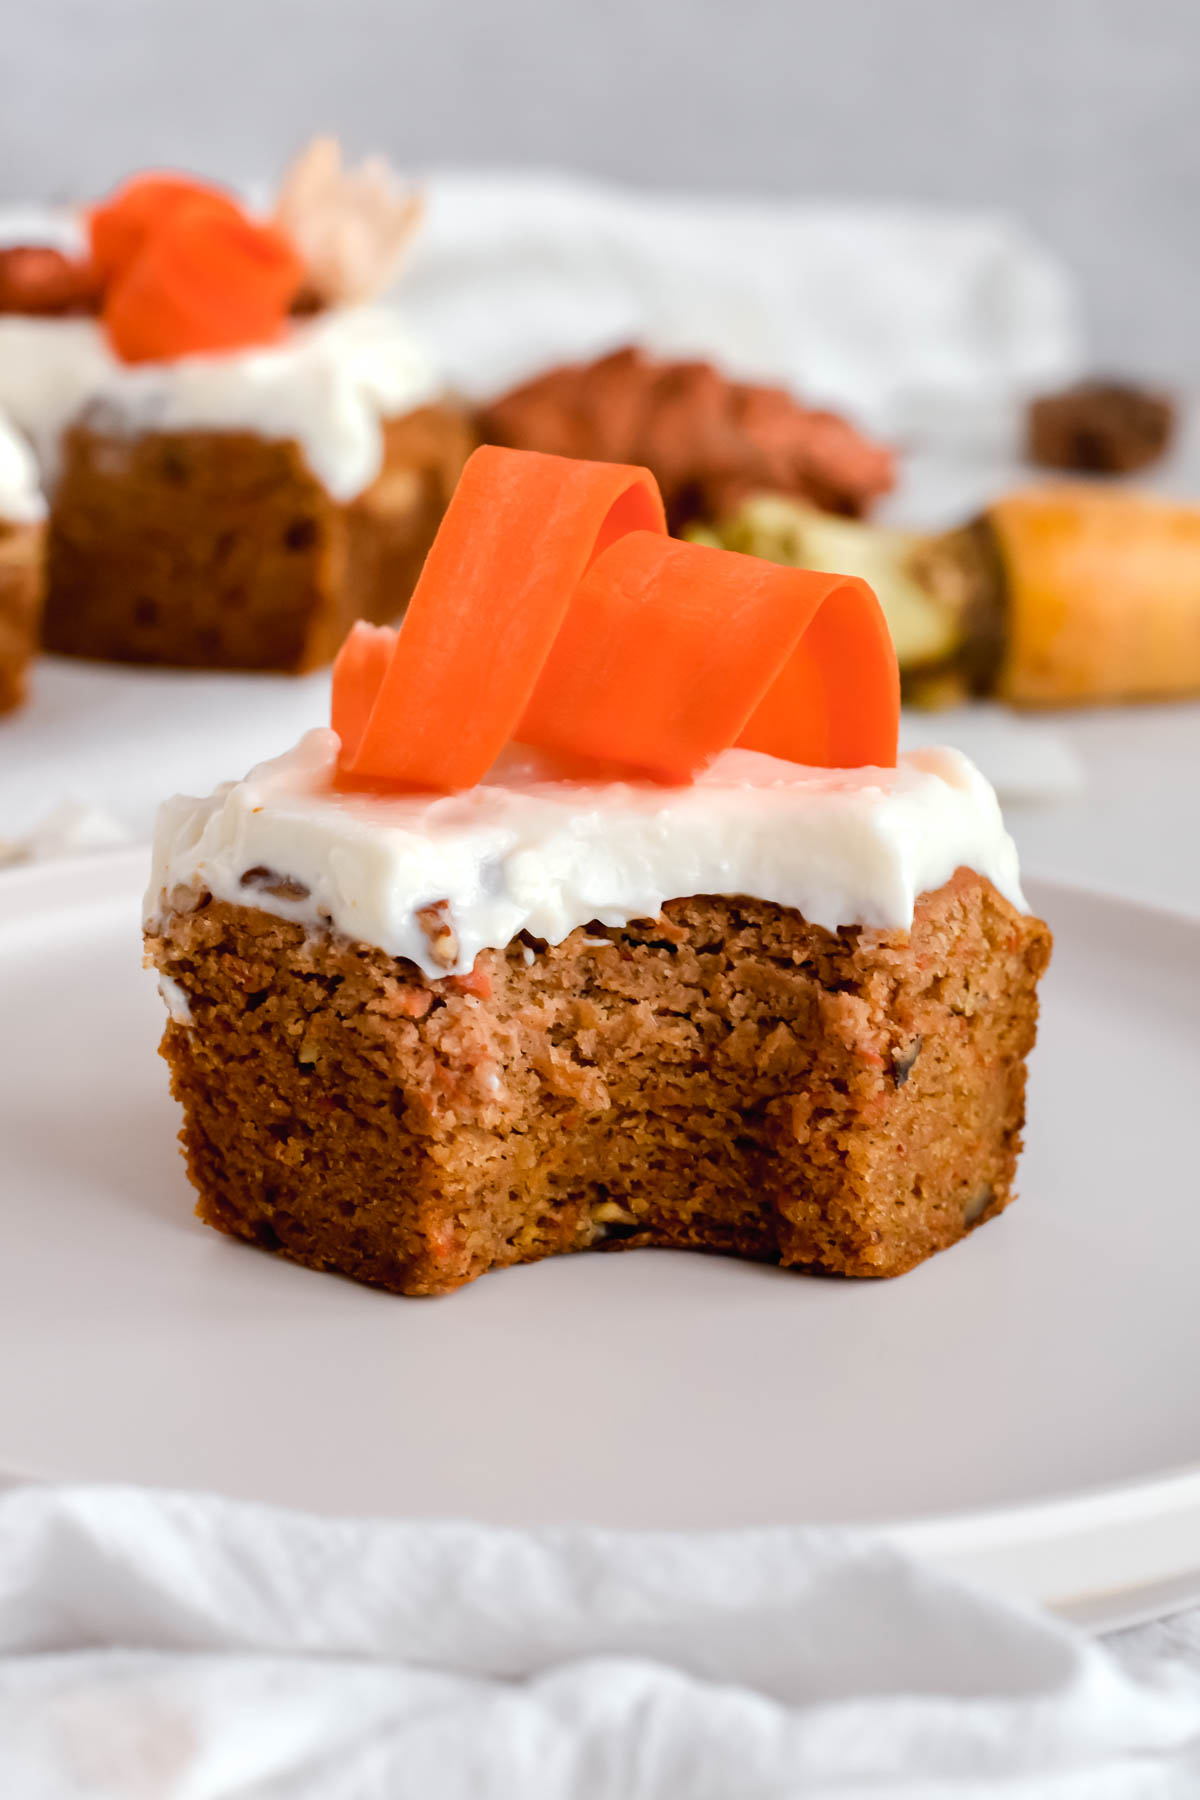 carrot cake bar topped with cream cheese icing and shredded carrots with a bite taken out of it.